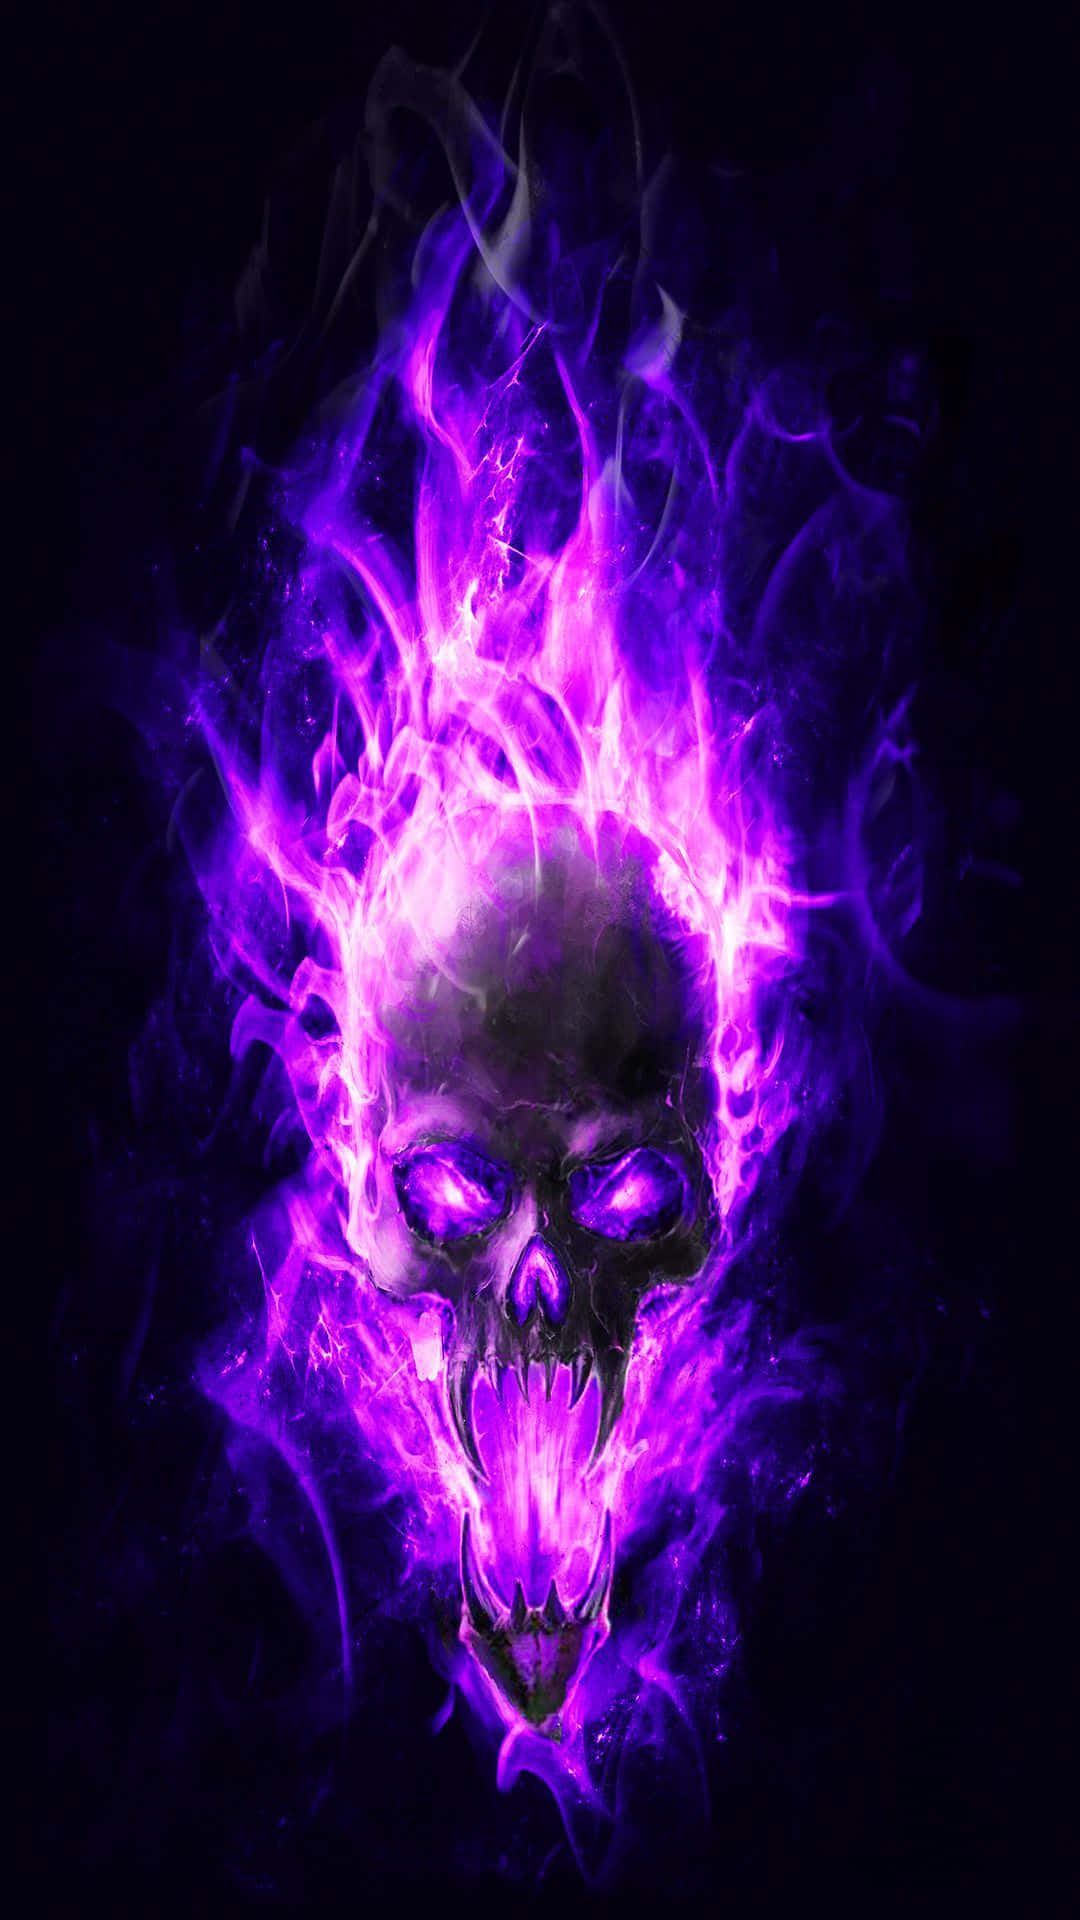 Feel the heat of the captivating purple fire.